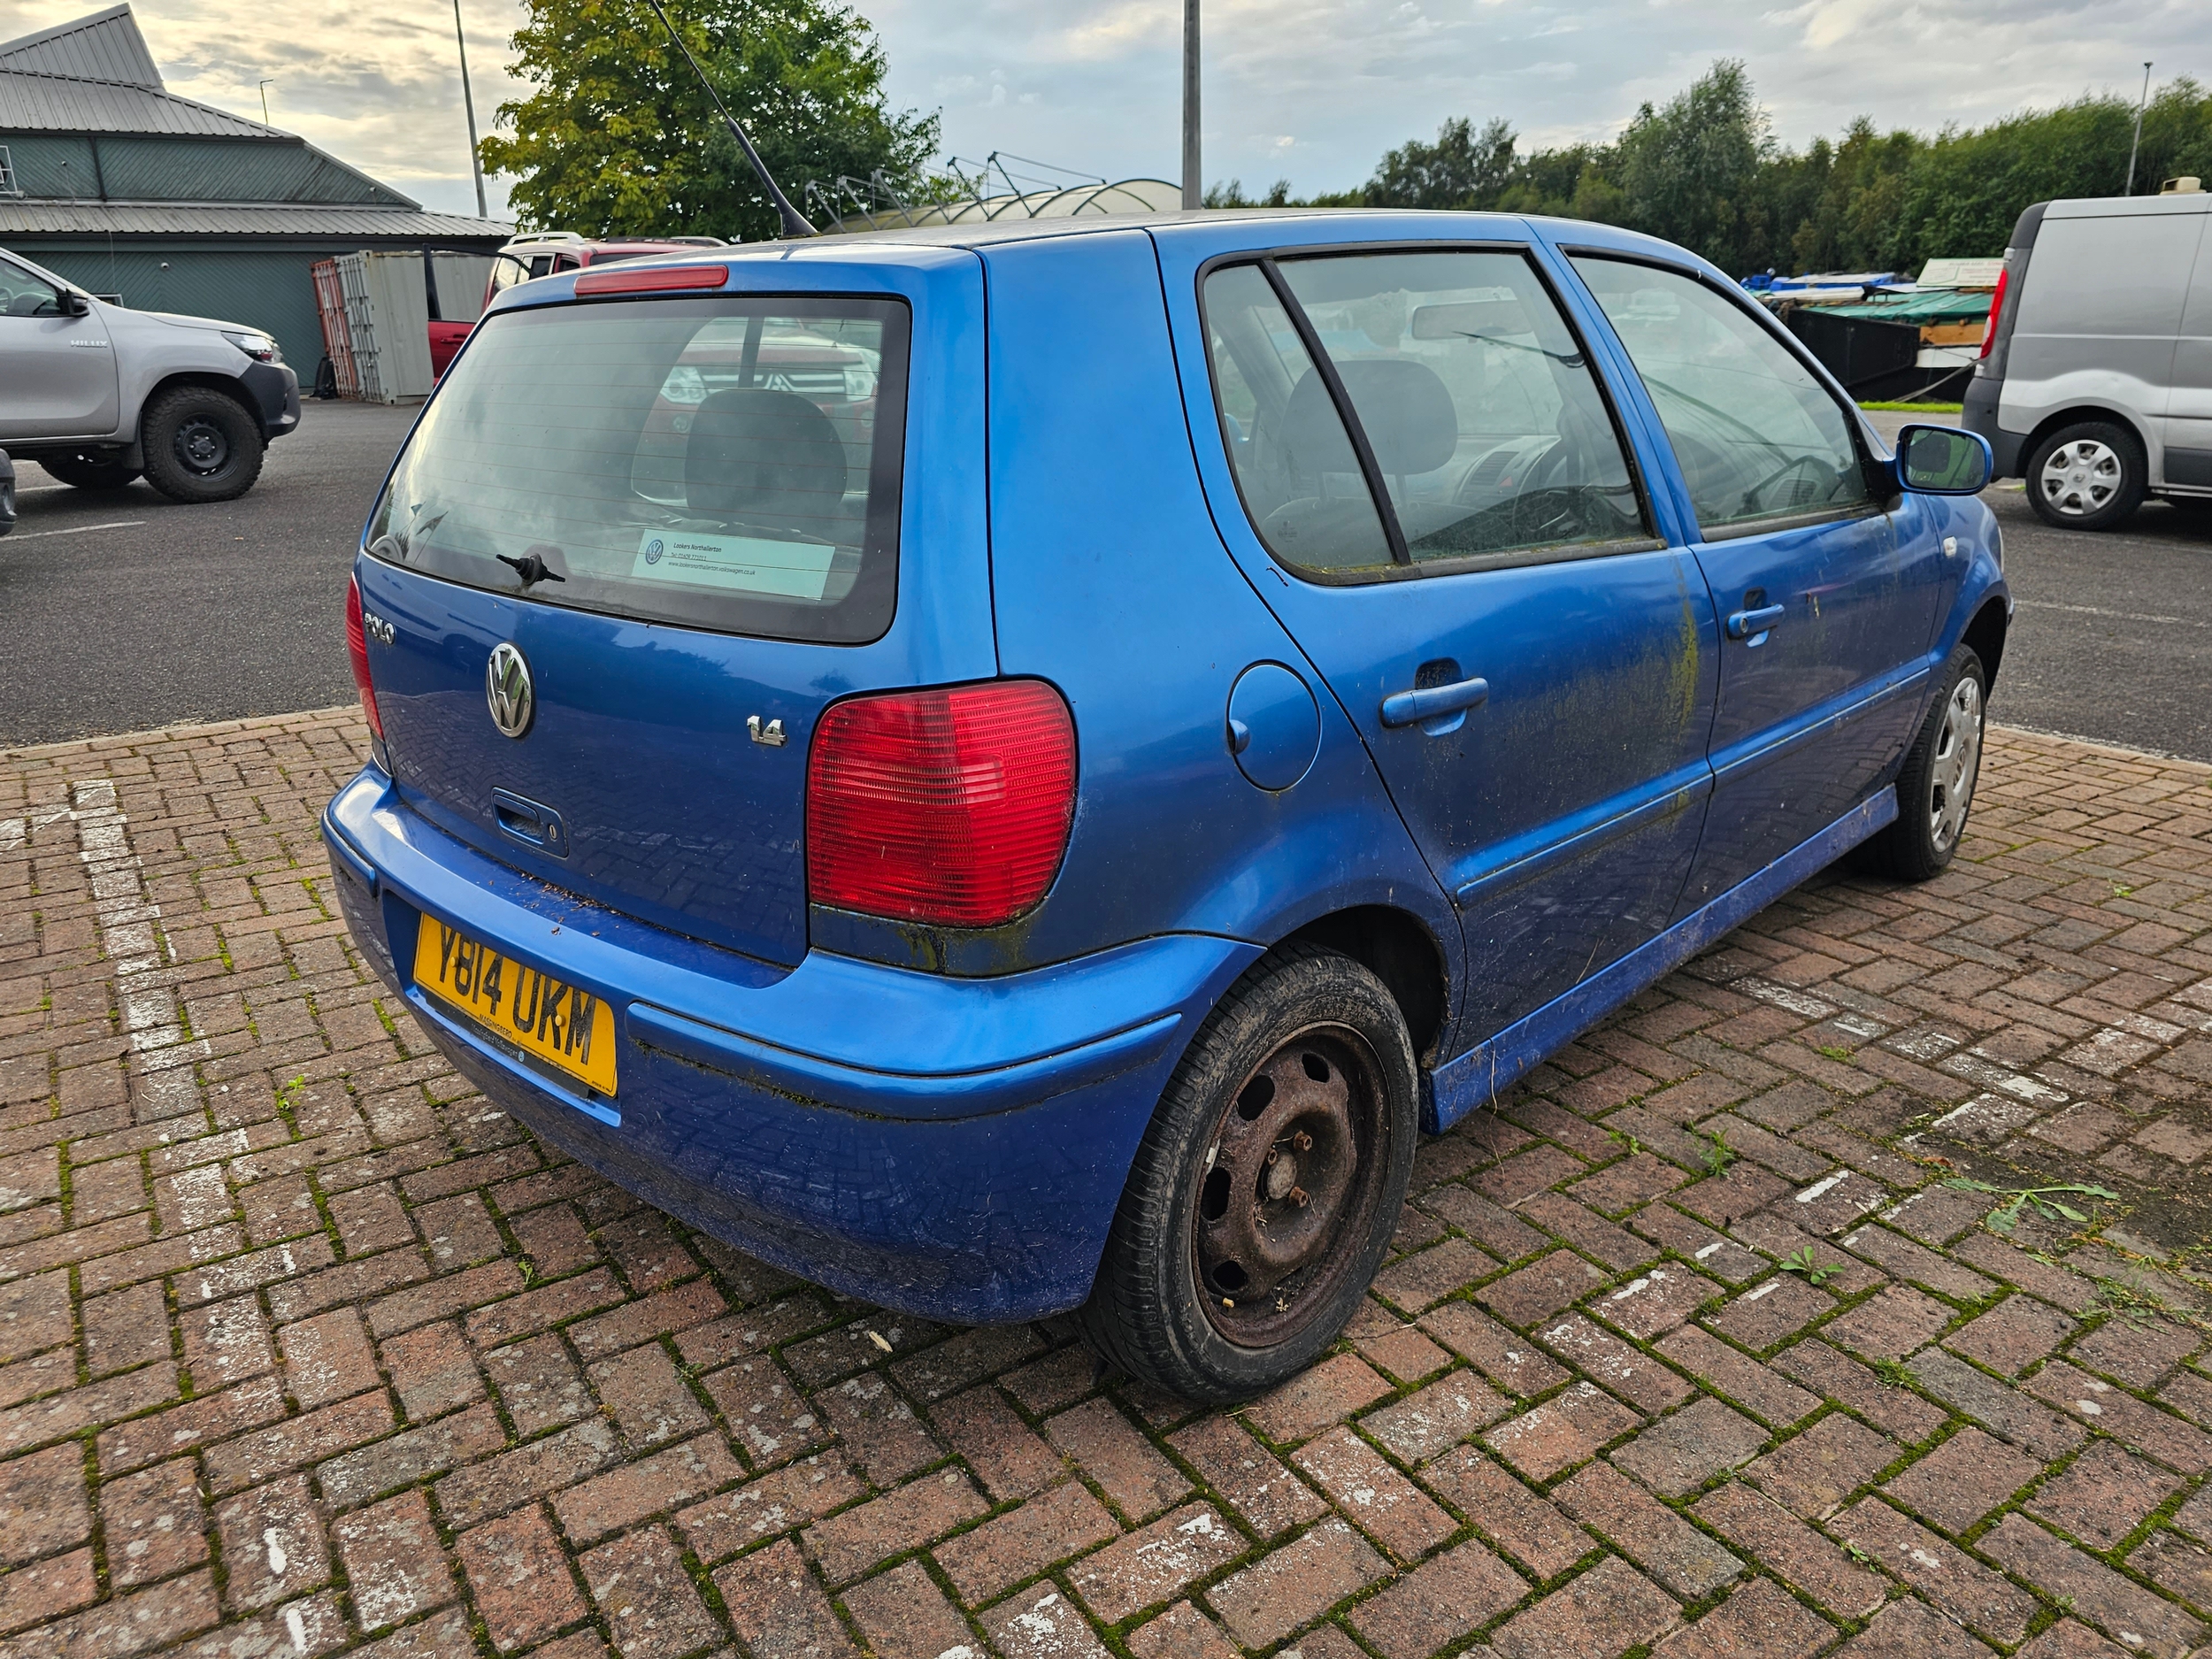 2001 VW POLO, 1390cc. Registration number Y814UKM. VIN number WVWZZZ6NZ1Y259513. Property of a - Image 7 of 11